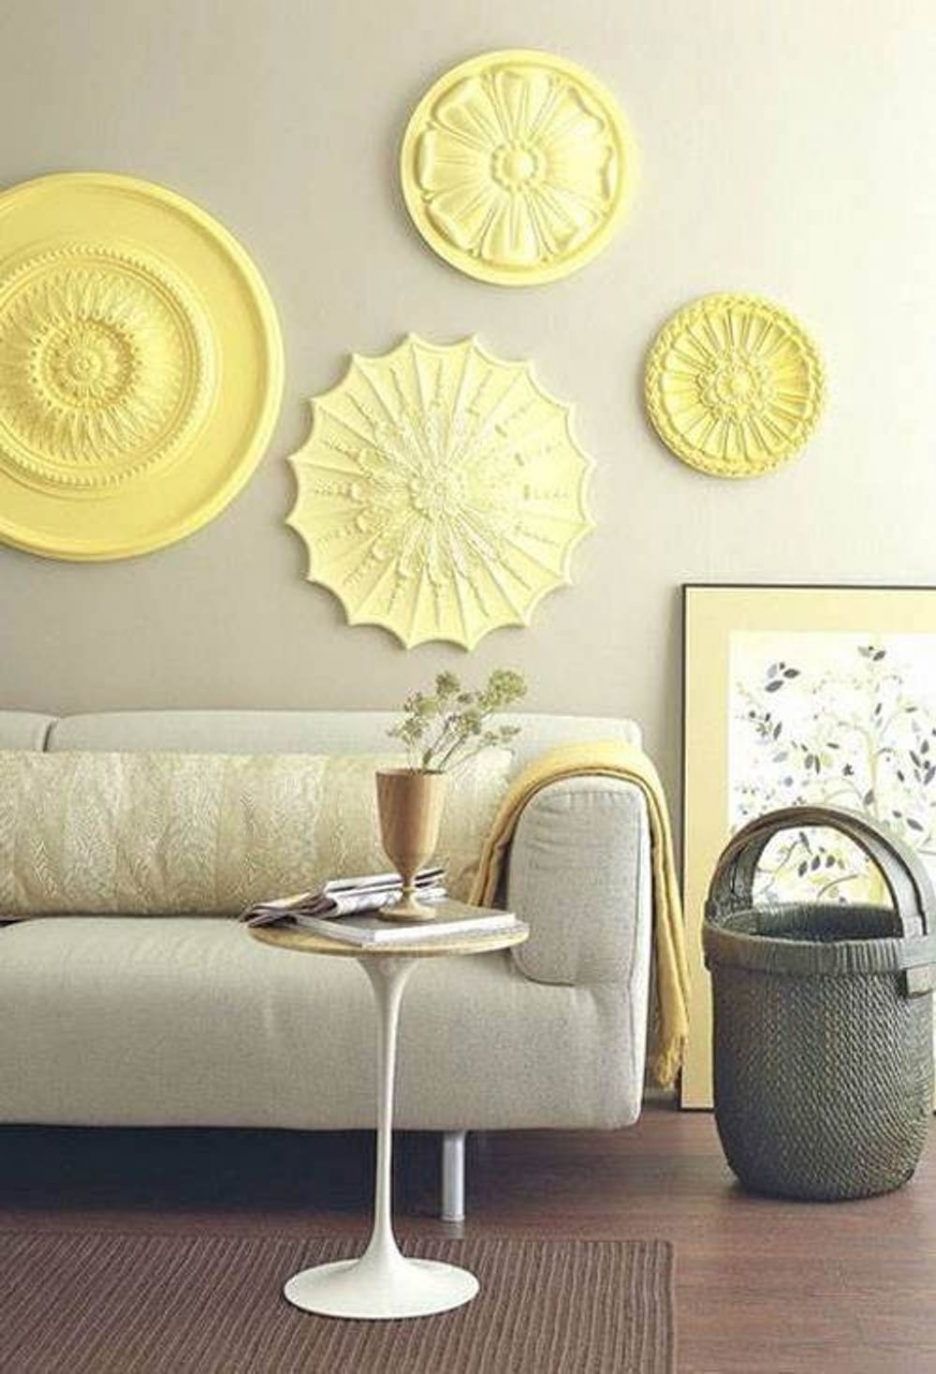 Most Recently Released Wall Art Accents Regarding Living Room : Wonderful Wall Art Ideas For Living Room With Yellow (View 10 of 15)